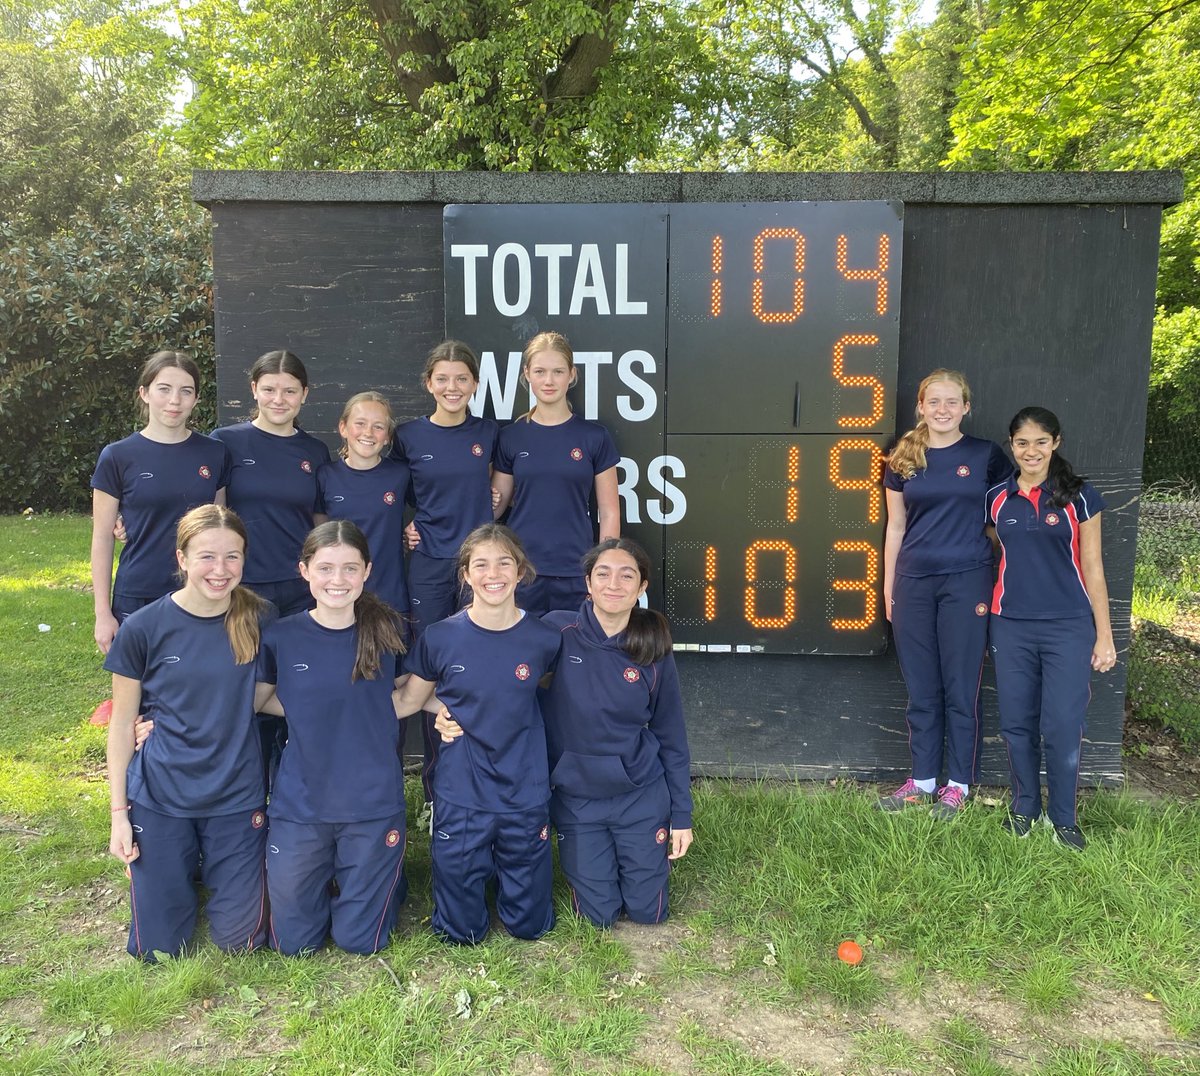 Well done to our U13 girls cricket team who progress to the county cup final after a nail biting game v @MillHillBelmont which neither side deserved to lose. The level of cricket on show was superb. 💥🏏 #teamberko